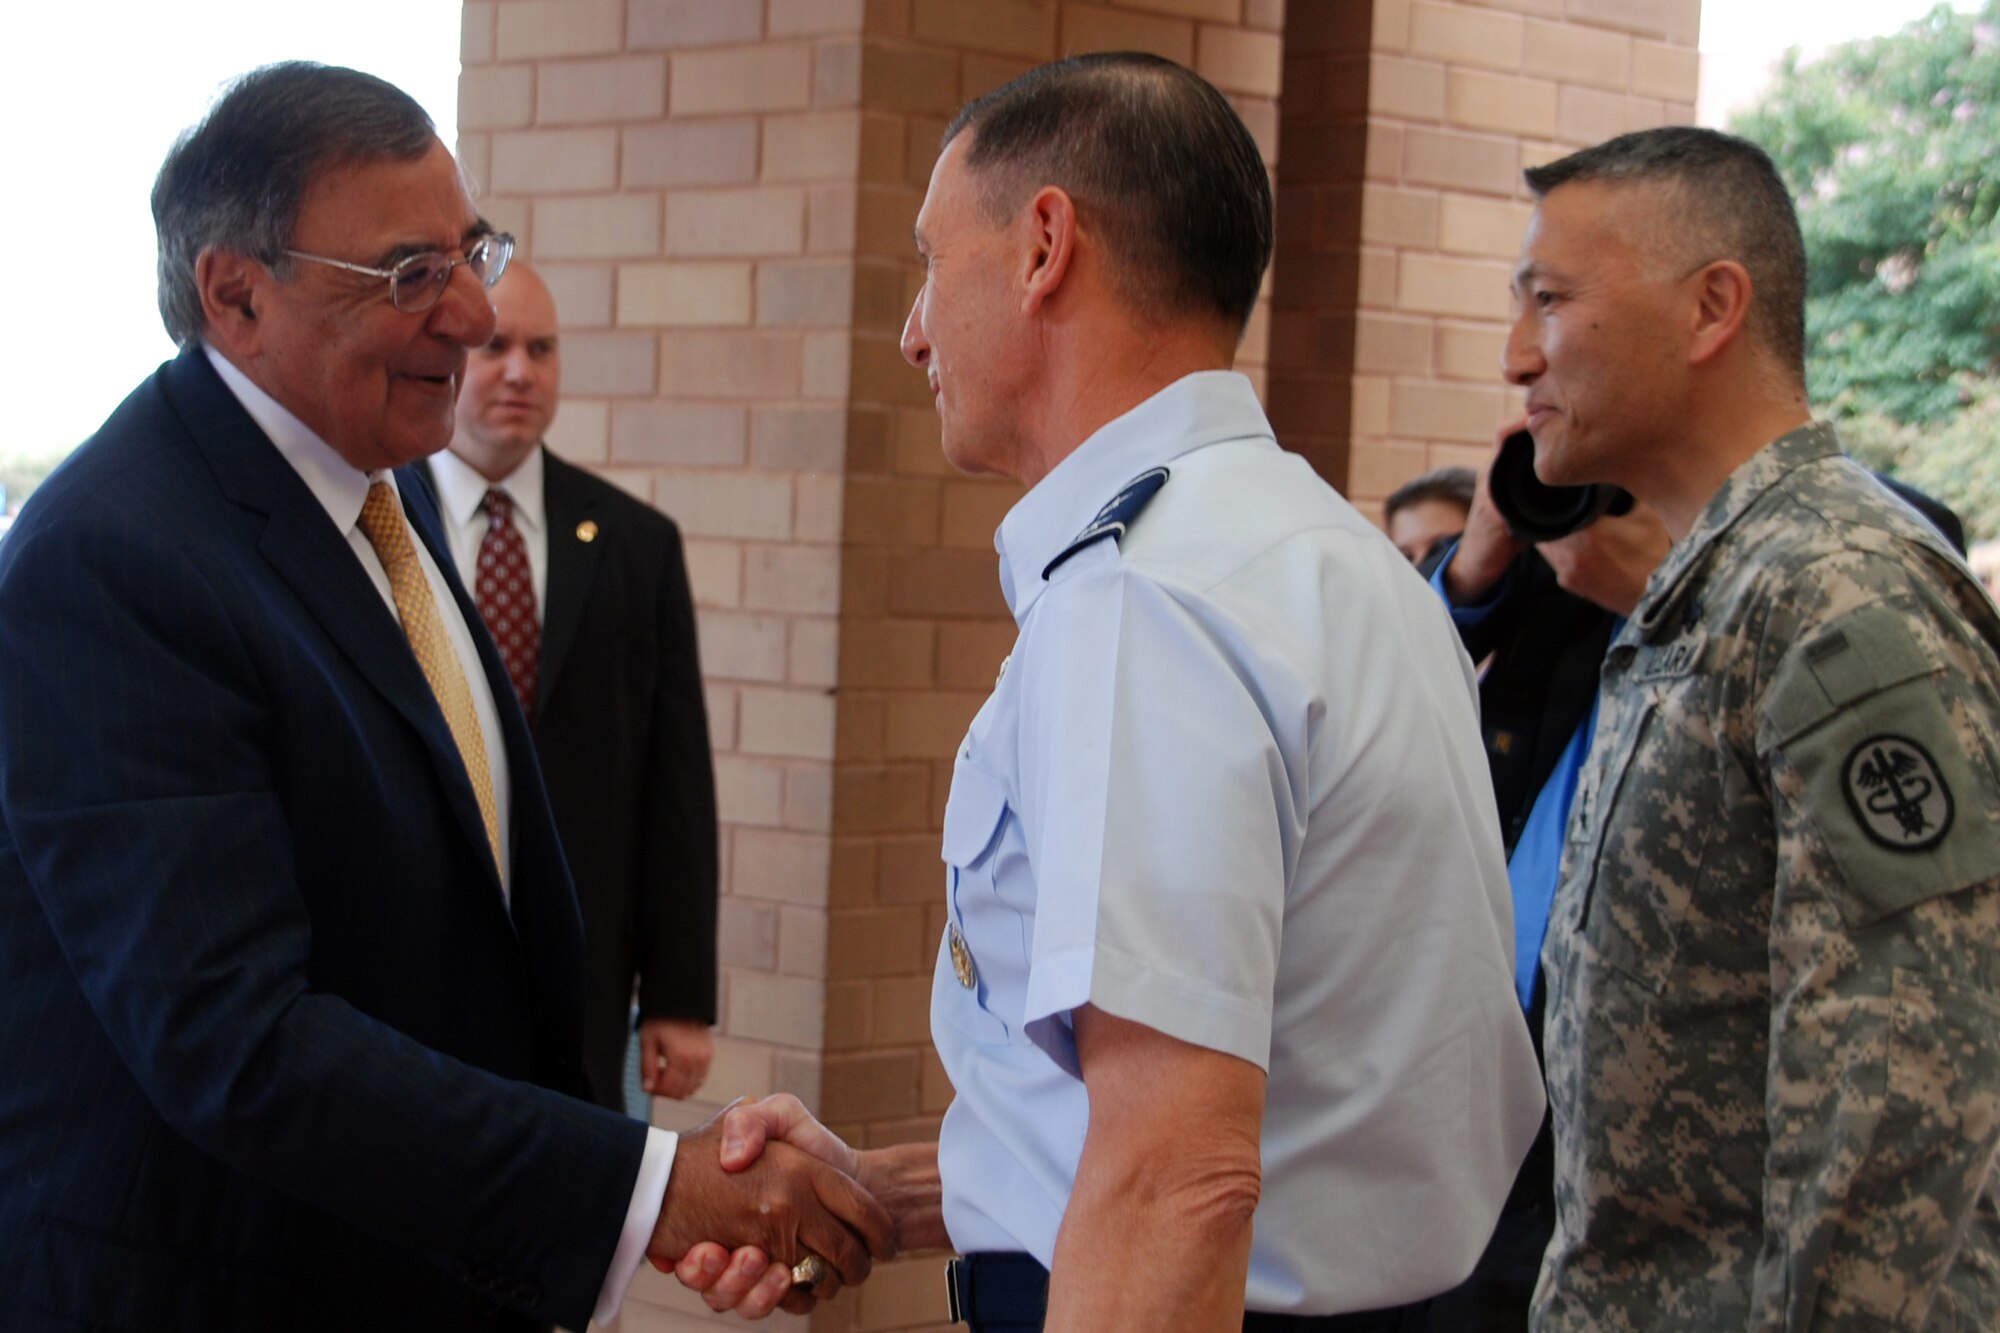 Defense Secretary Leon E. Panetta greets Air Force Maj. Gen. Byron Hepburn, director of the San Antonio Military Health System and commander, 59th Medical Wing and Maj. Gen. Ted Wong, commander, Brooke Army Medical Center at San Antonio Military Medical Center, June 27, 2012. Panetta spent the day visiting with wounded warriors at the Center for the Intrepid and SAMMC, thanking each troop and their families for their service and sacrifice.( U.S. Army photo/ Maria Gallegos)
